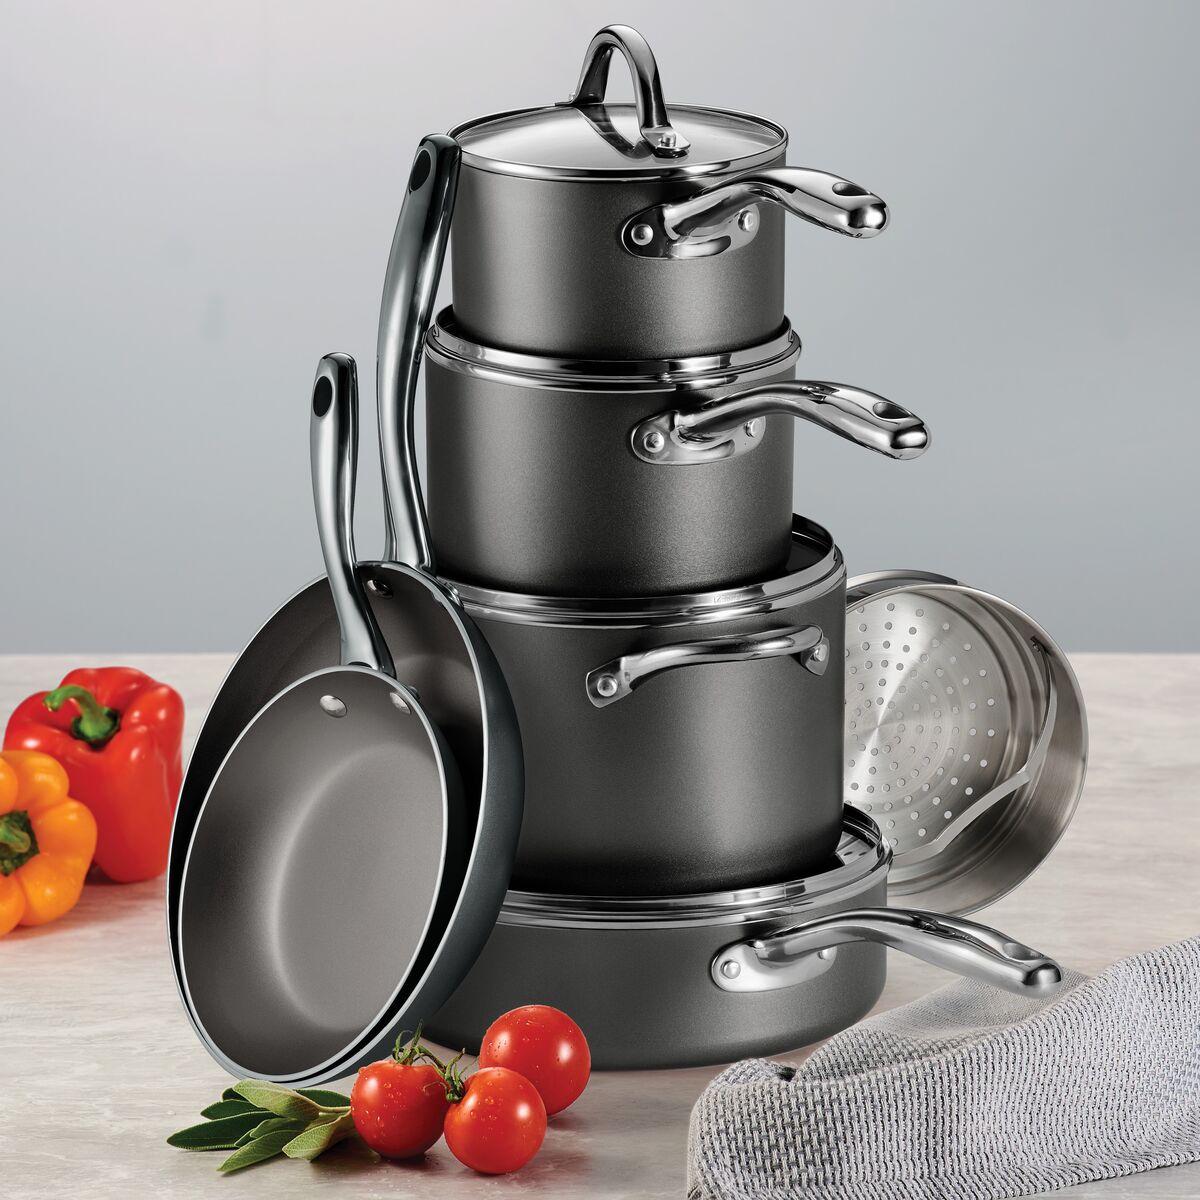 11 Pc Nonstick Cookware Set- Charcoal Gray - Tramontina US